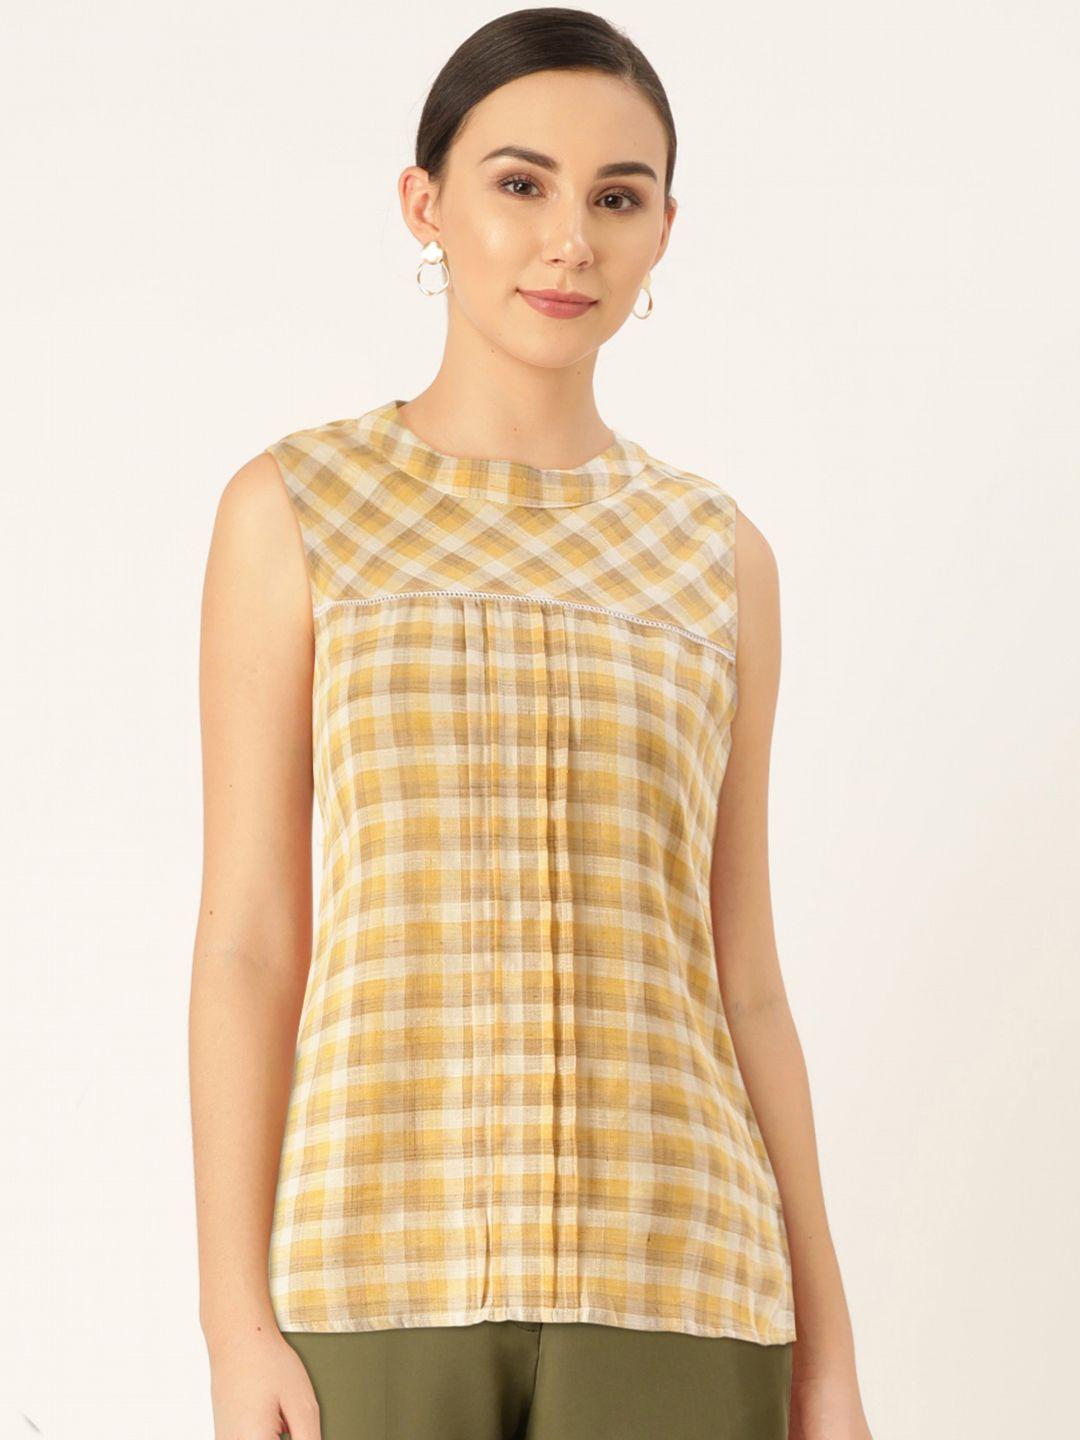 and-women-yellow-&-off-white-checked-top-with-pleated-detailing